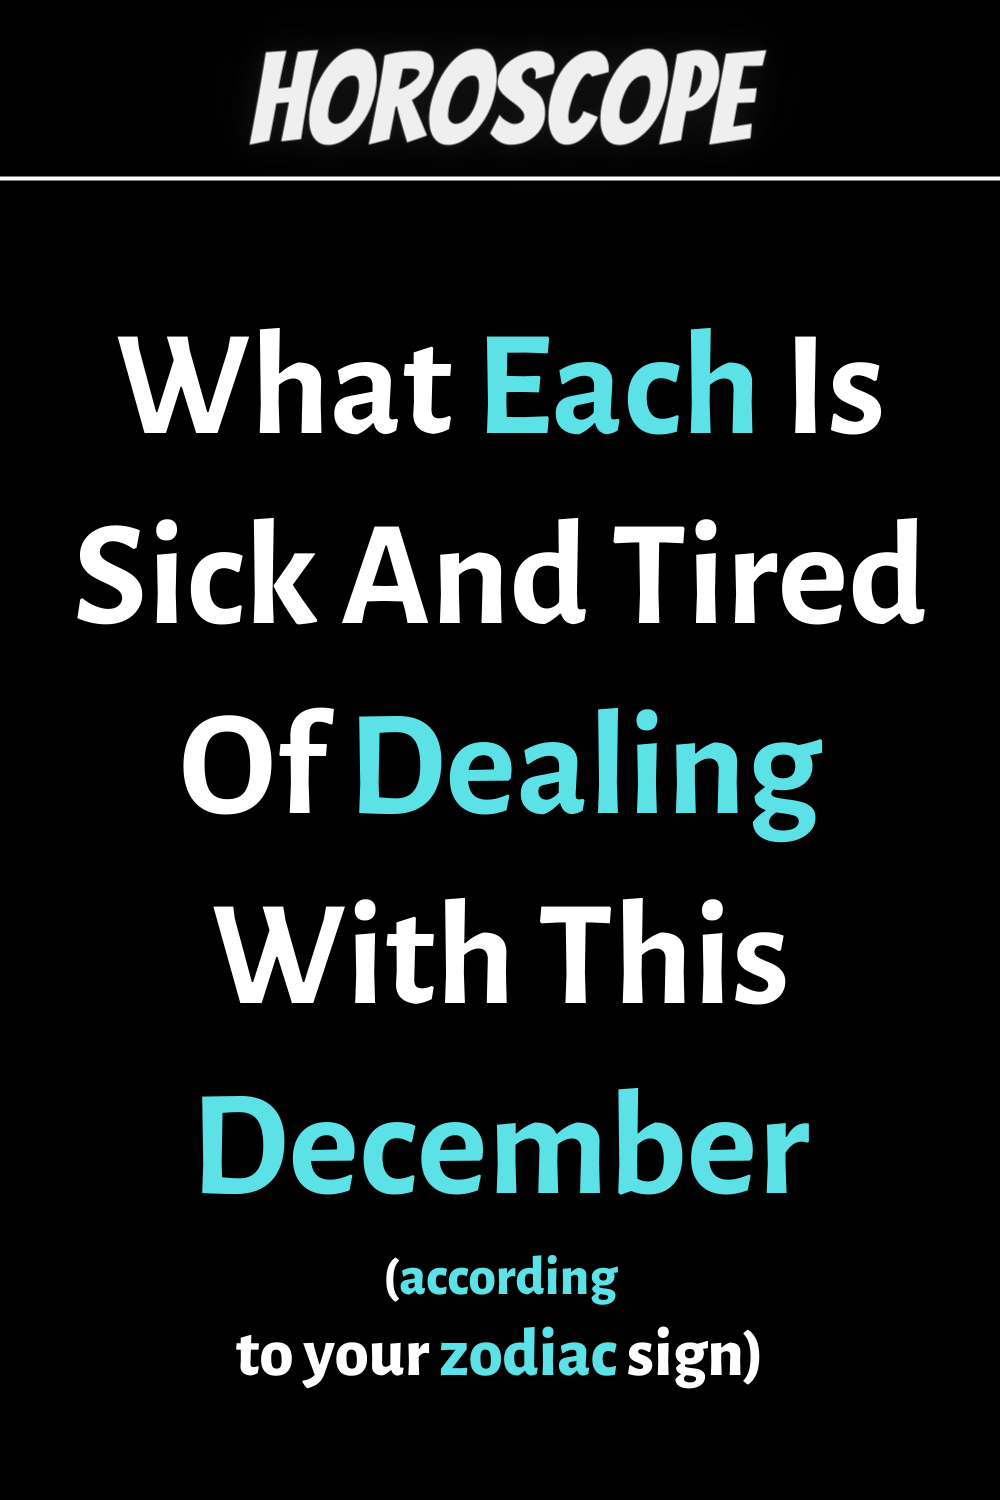 What Each Zodiac Is Sick And Tired Of Dealing With This December